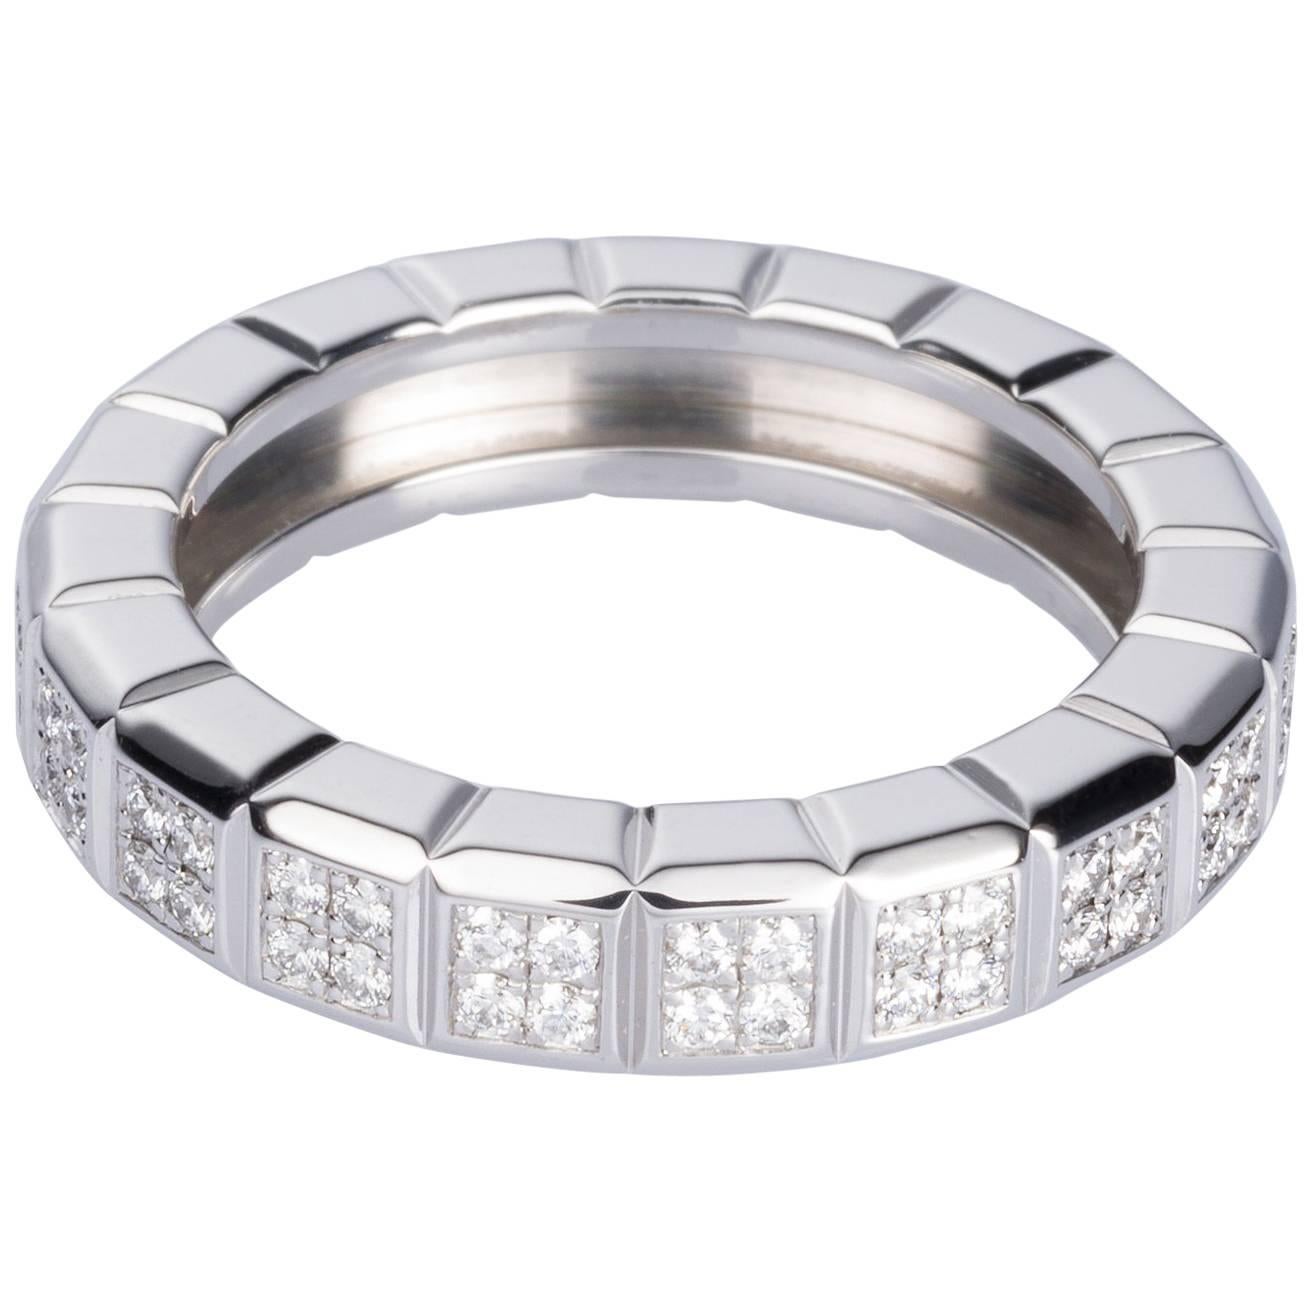 Chopard 'Ice Cube' Collection 18 Karat White Gold Diamond Band Ring